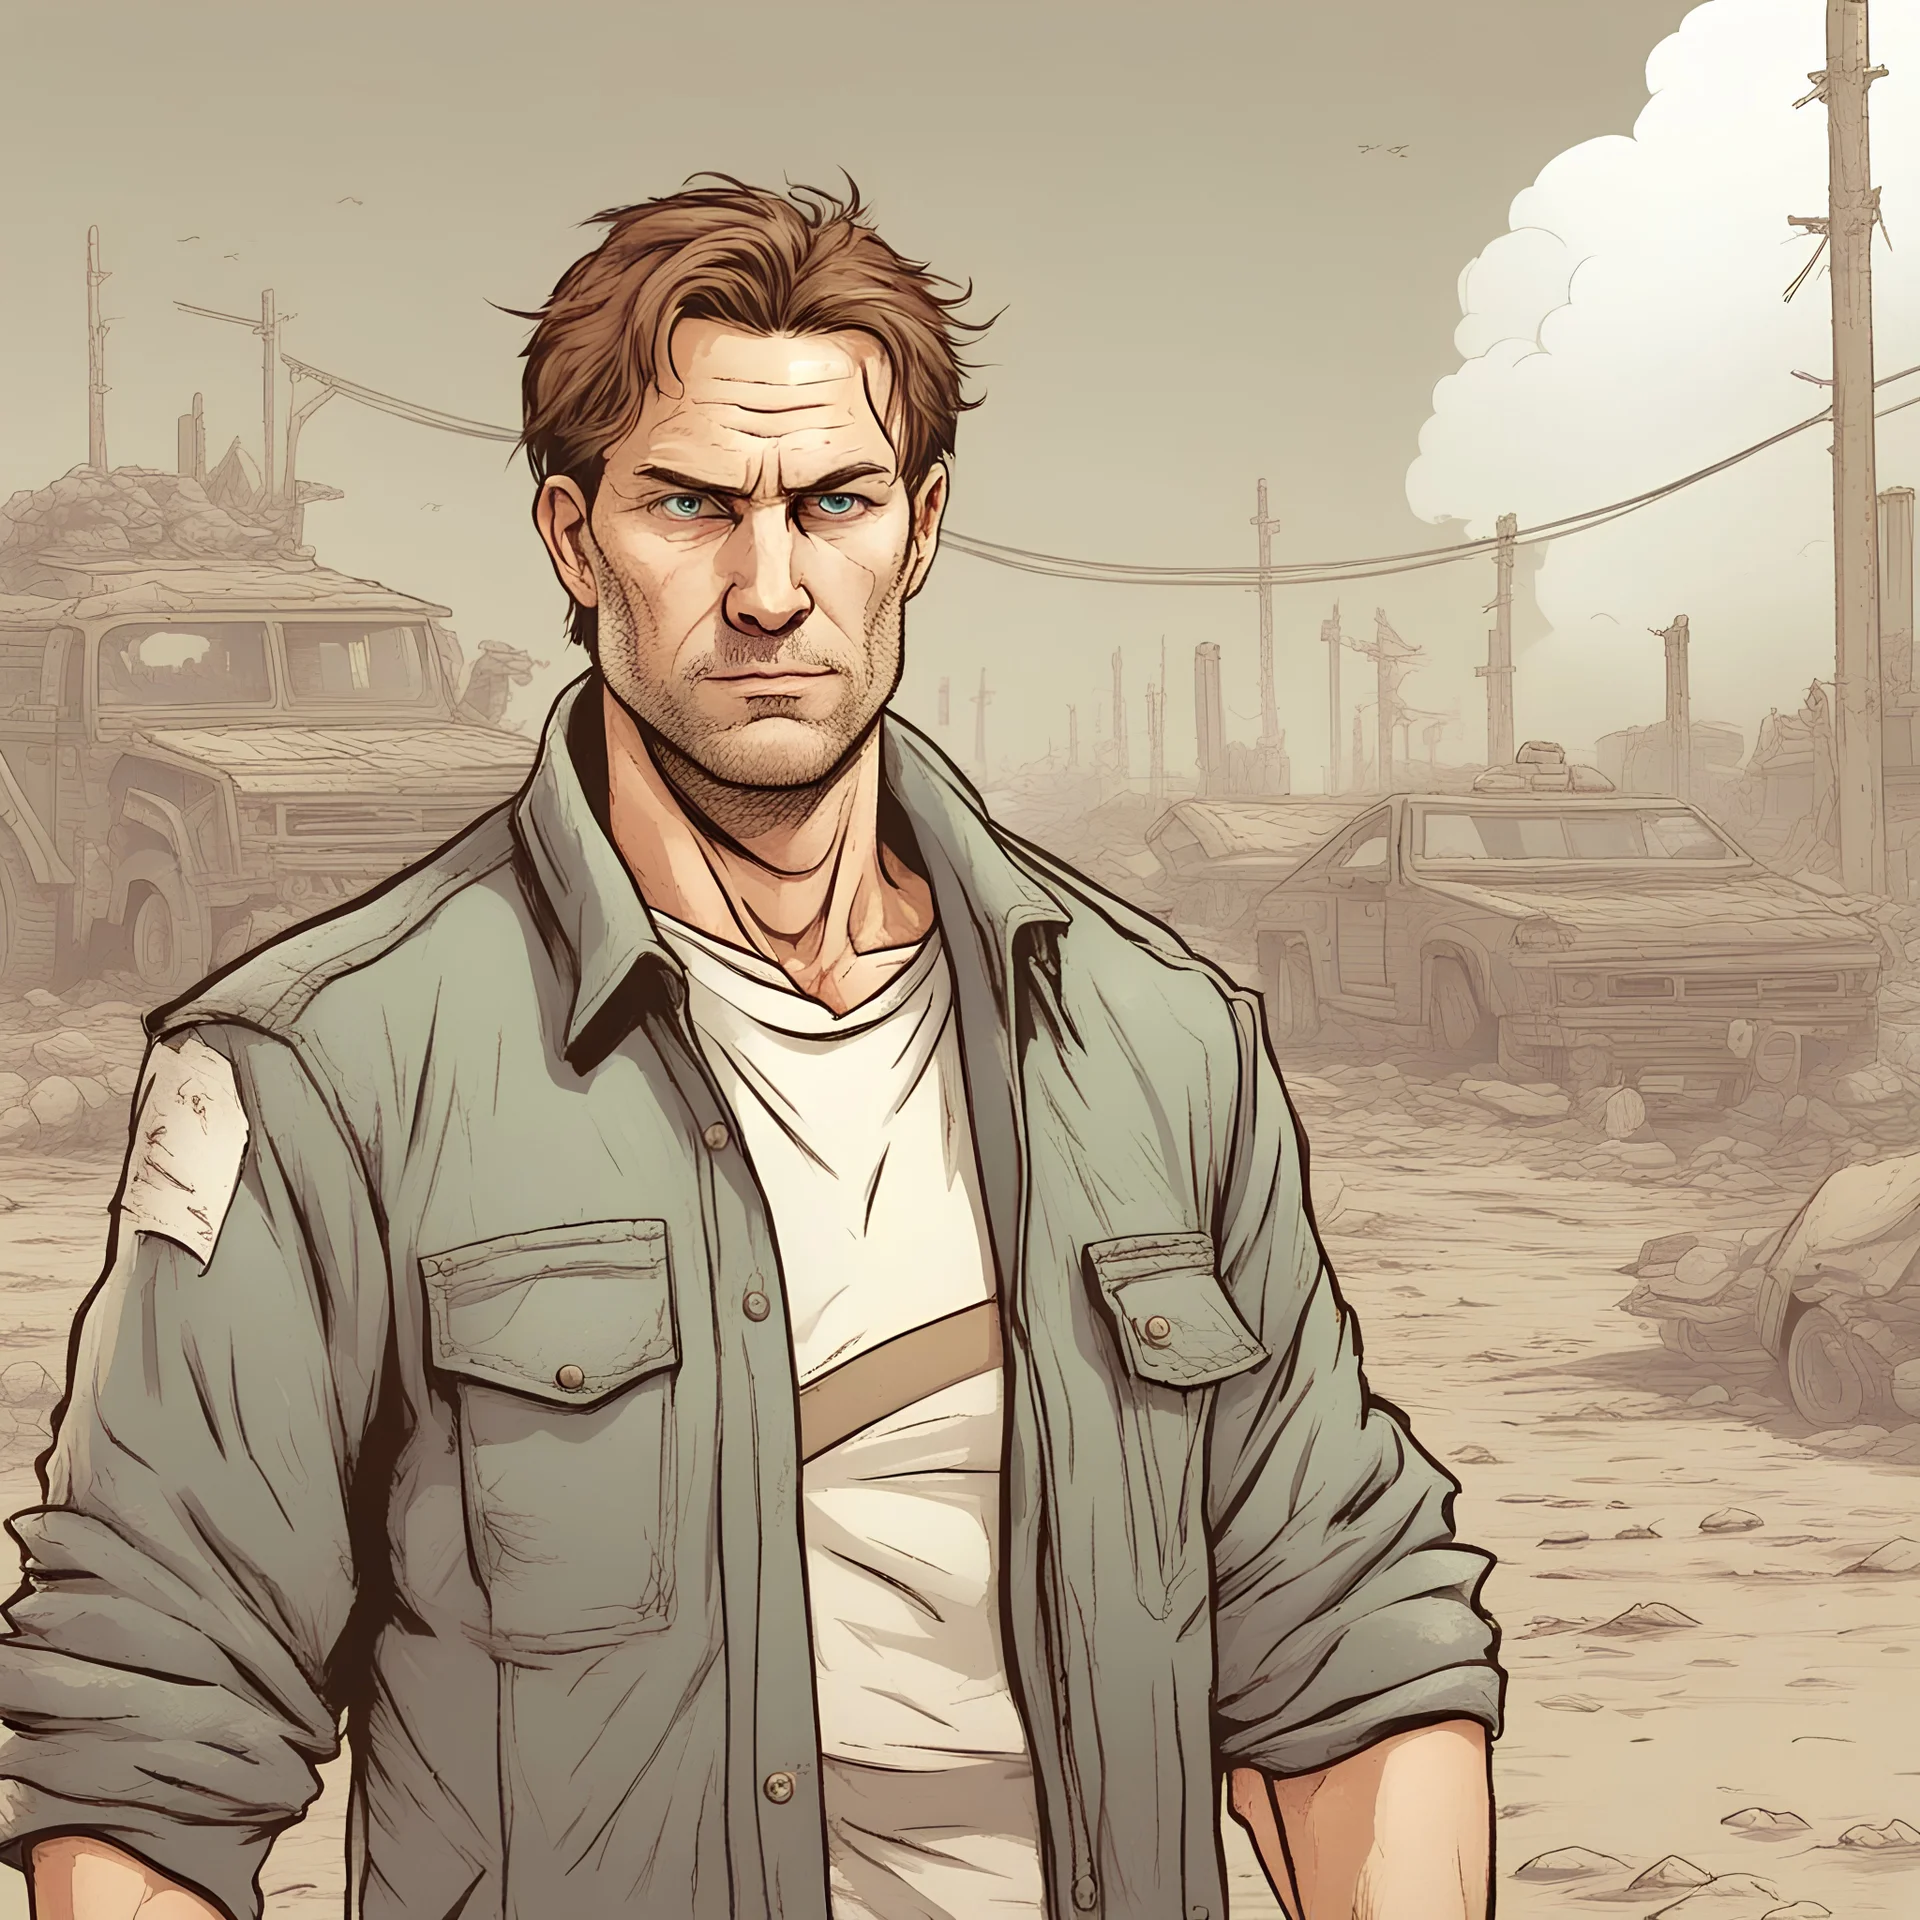 Portrait, 40 years old male character with brown hair, t-shirt comic book illustration looking straight ahead, post apocalypse